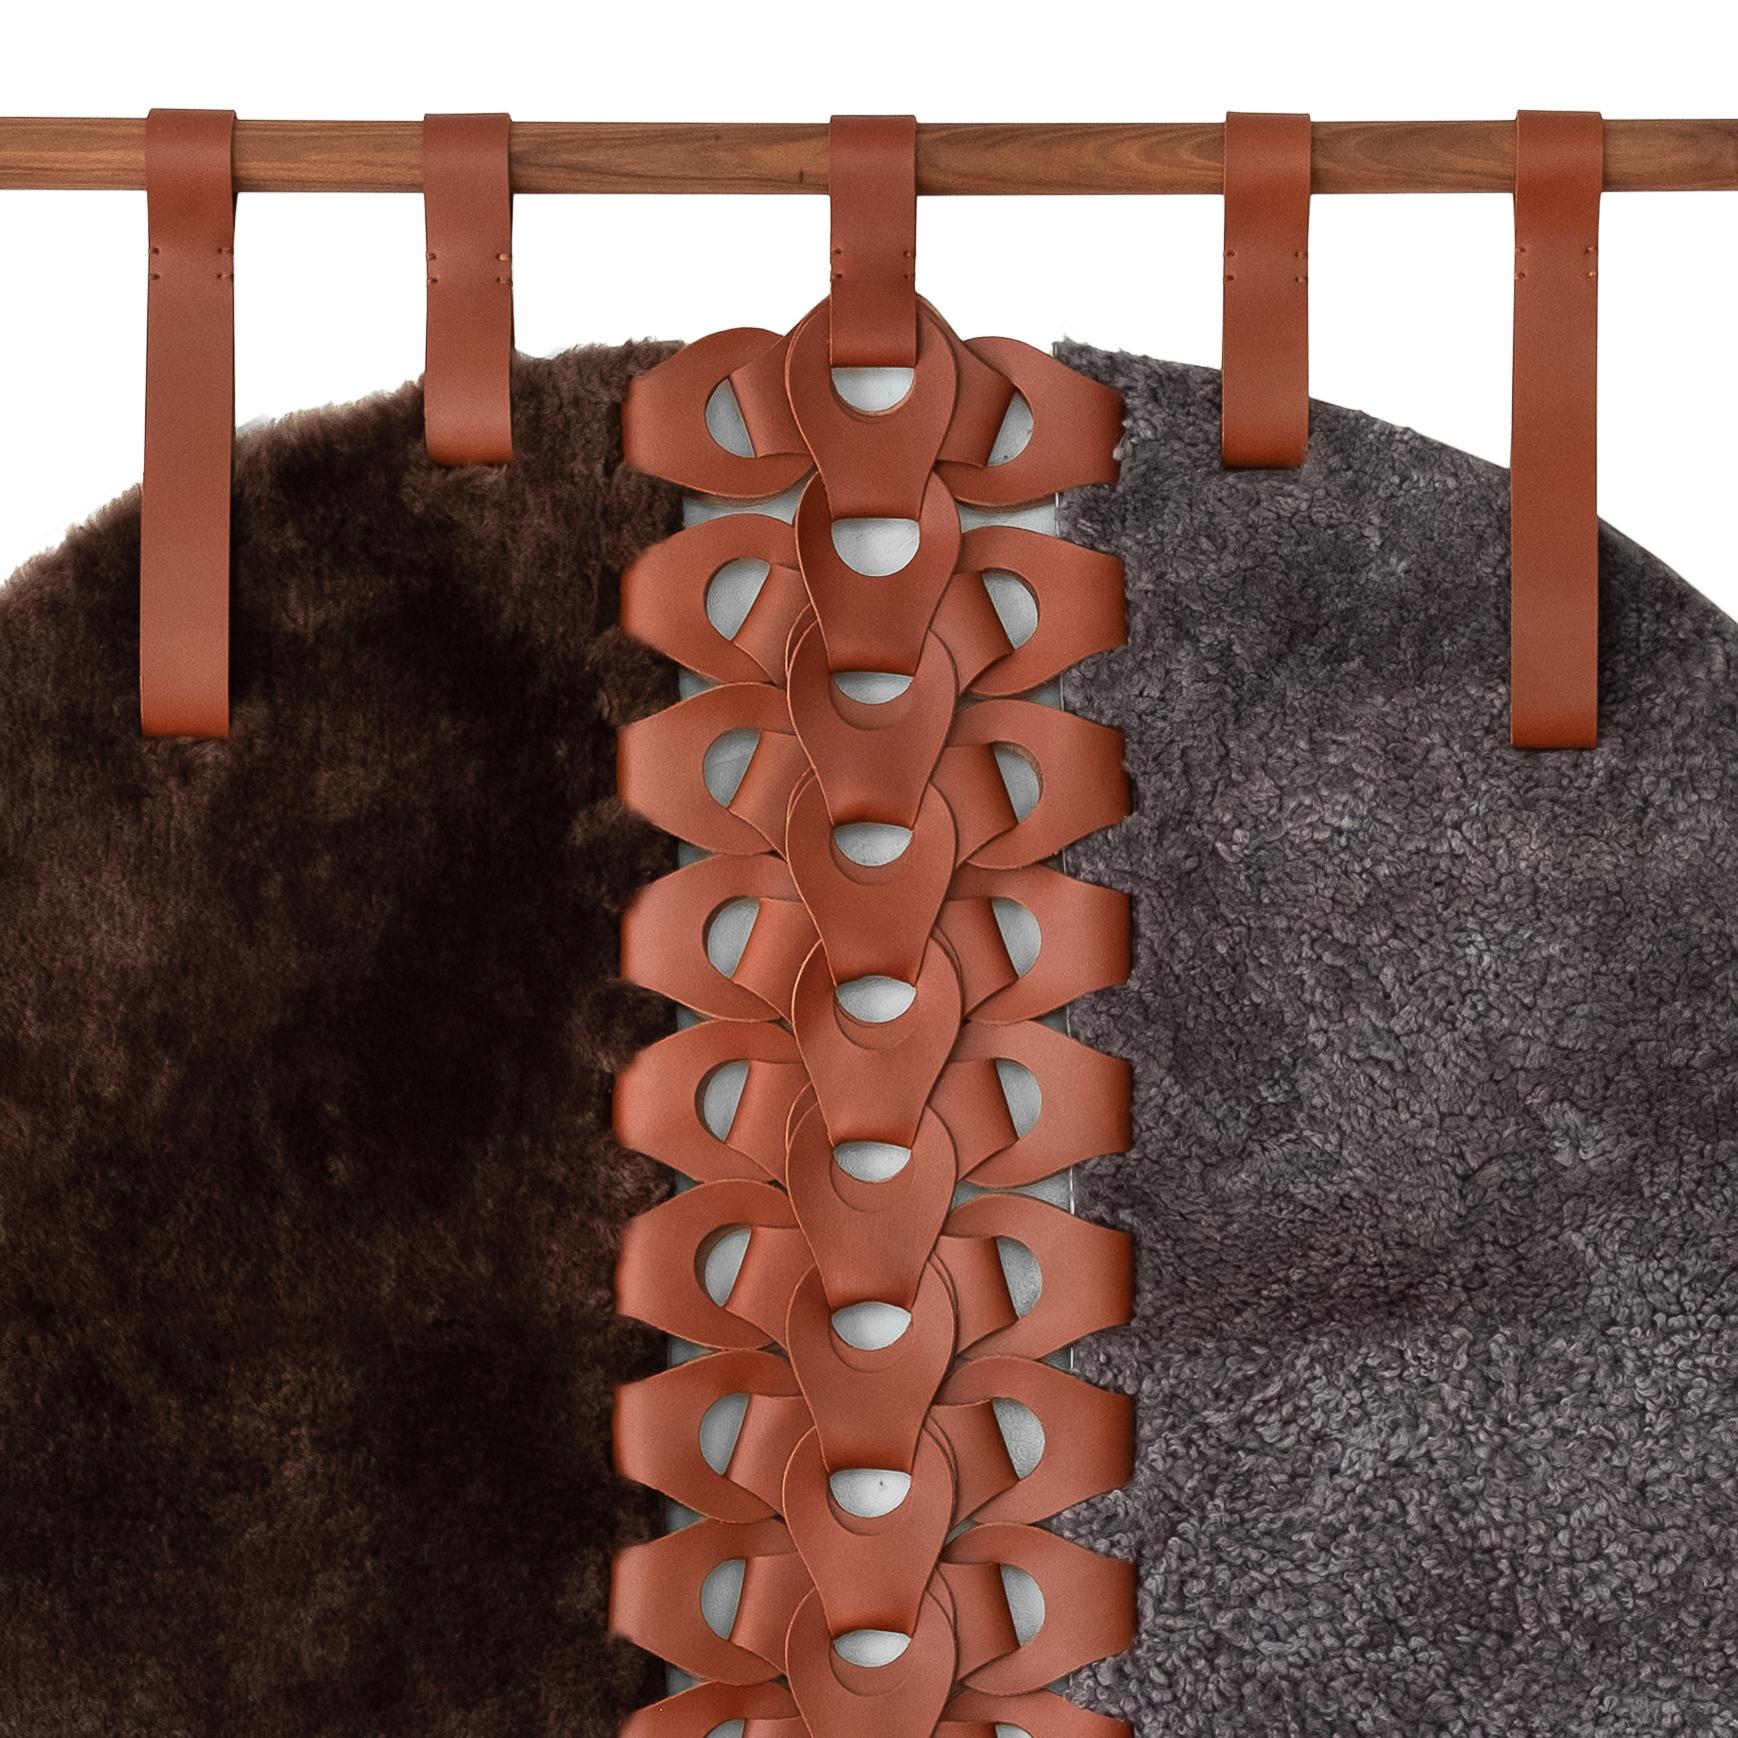 The Vertebrae Pill Tapestry X is the pill; shaped variation of our Vertebrae Tapestry X! It brings an organic vibe to the walls of any room. 
Designed with shearling panels (colors: Chocolate Pared Shearling on reft, Stone Surly Shearling on right),